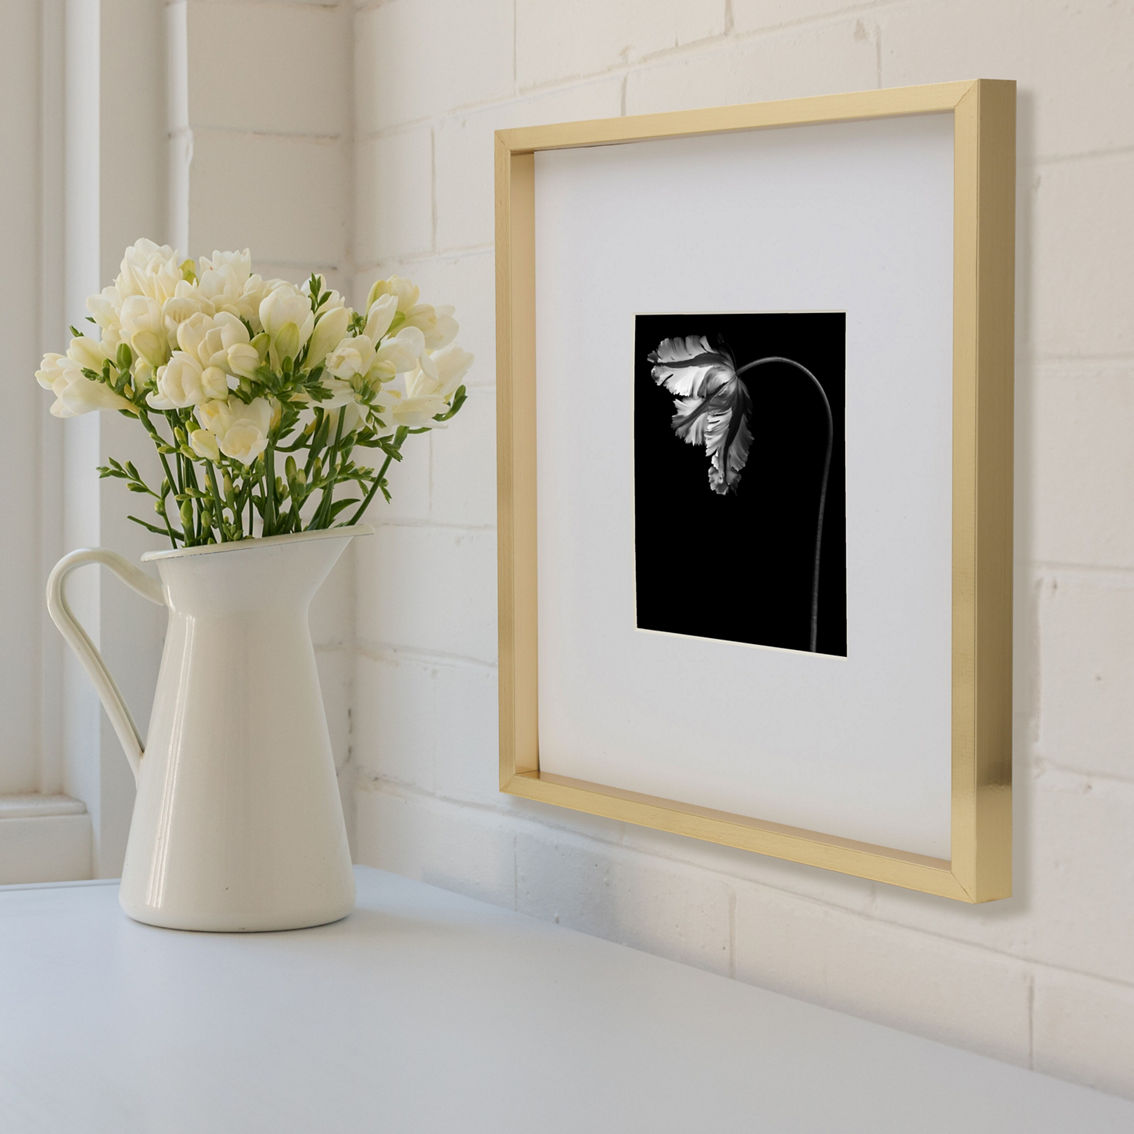 Mikasa Home 8x10 / 16x20 Gold Gallery Frame - Image 5 of 6